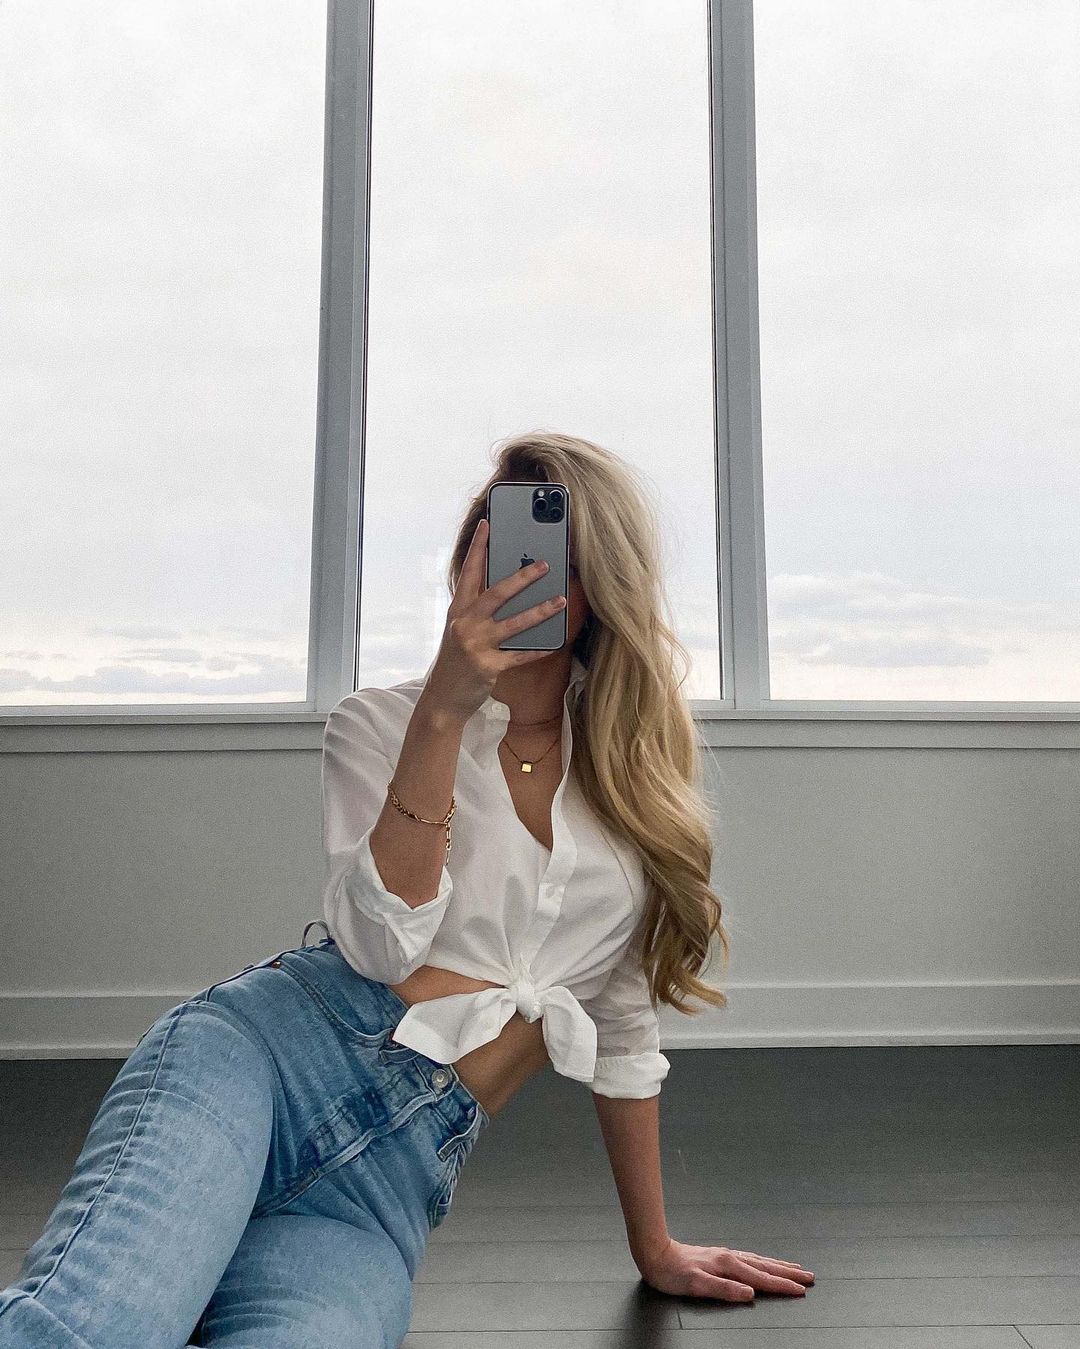 Woman sitting down wearing jeans and white shirt with long blonde hair, taking a picture in a mirror.